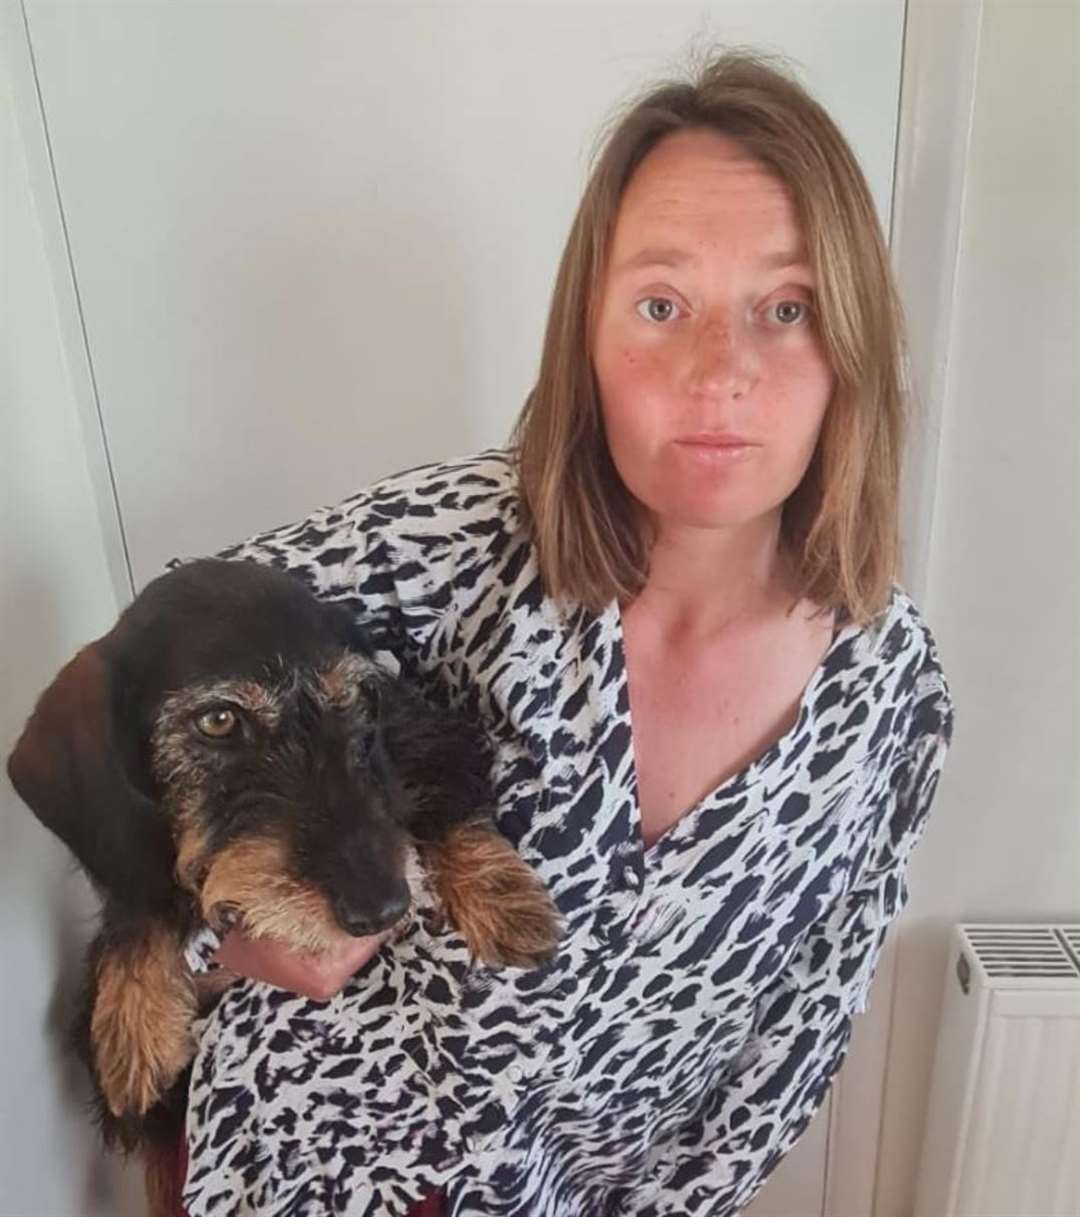 Kailyn Kreiselmeier was attacked by a dog while she walked in Oare Marshes, Faversham. Pictured with her dachshund, Tinkerbell. Picture: Kailyn Kreiselmeier